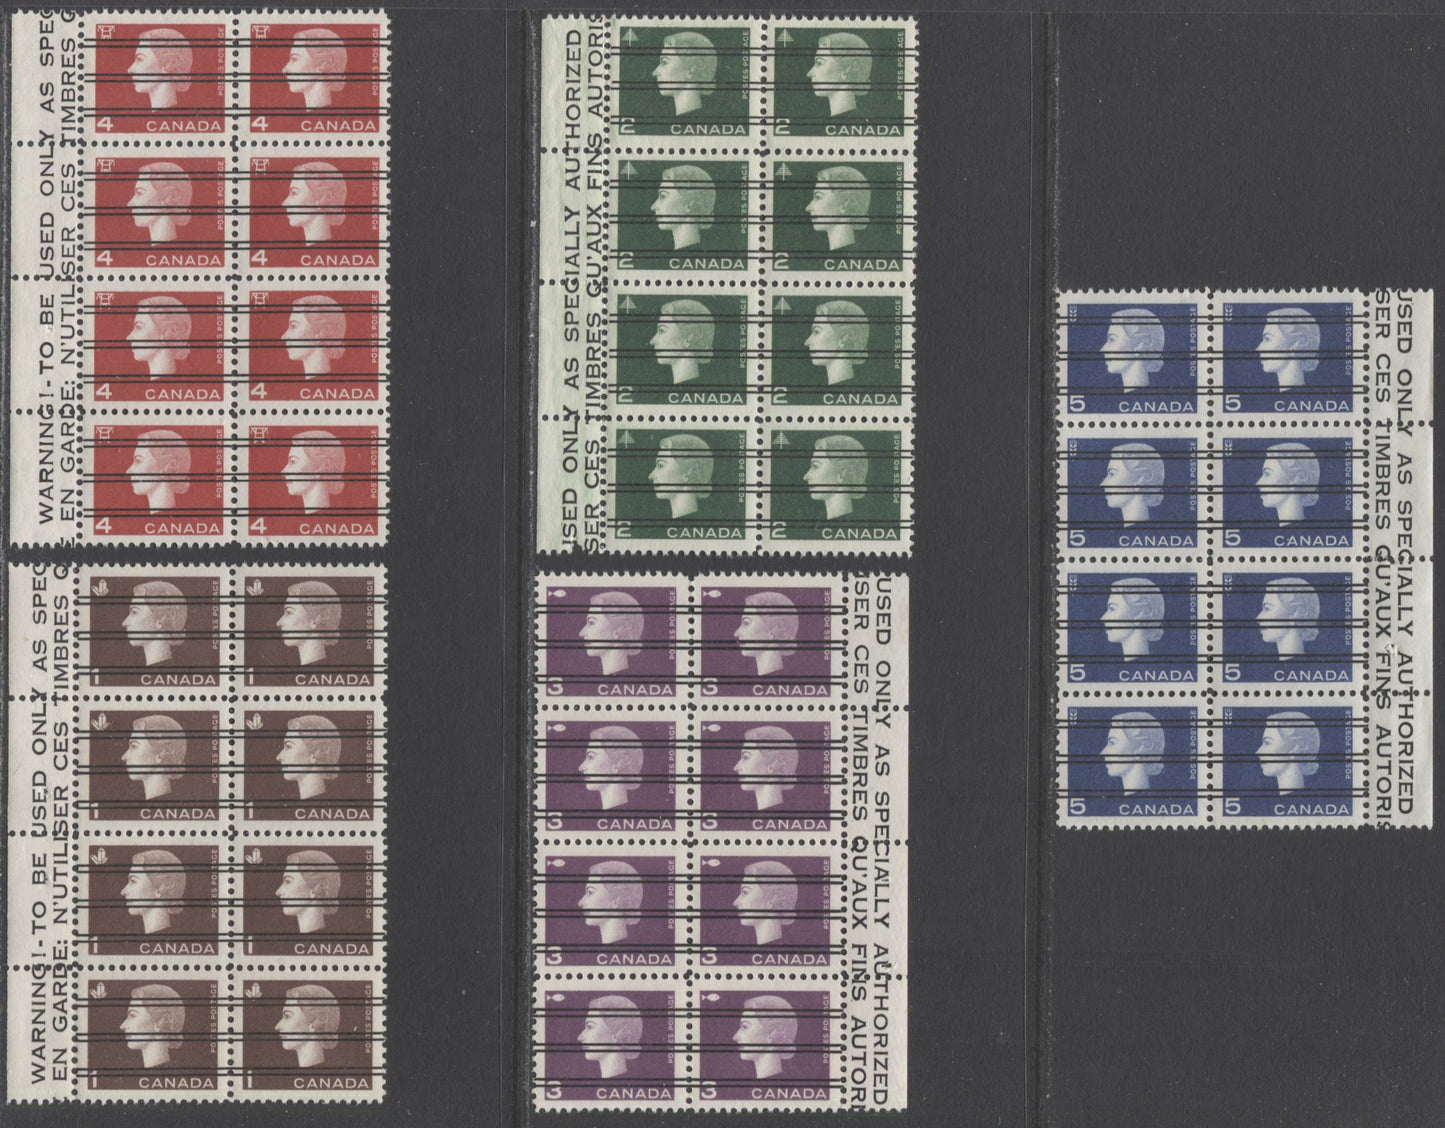 Lot 184 Canada #401xx-405xx 1c-5c Brown - Violet Blue Crystals/Agriculture, 1962-1963 Cameo Issue, 5 VFNH Precancelled Partial Warning Strips Of 8 From The Left & Right Sides Of The Sheet